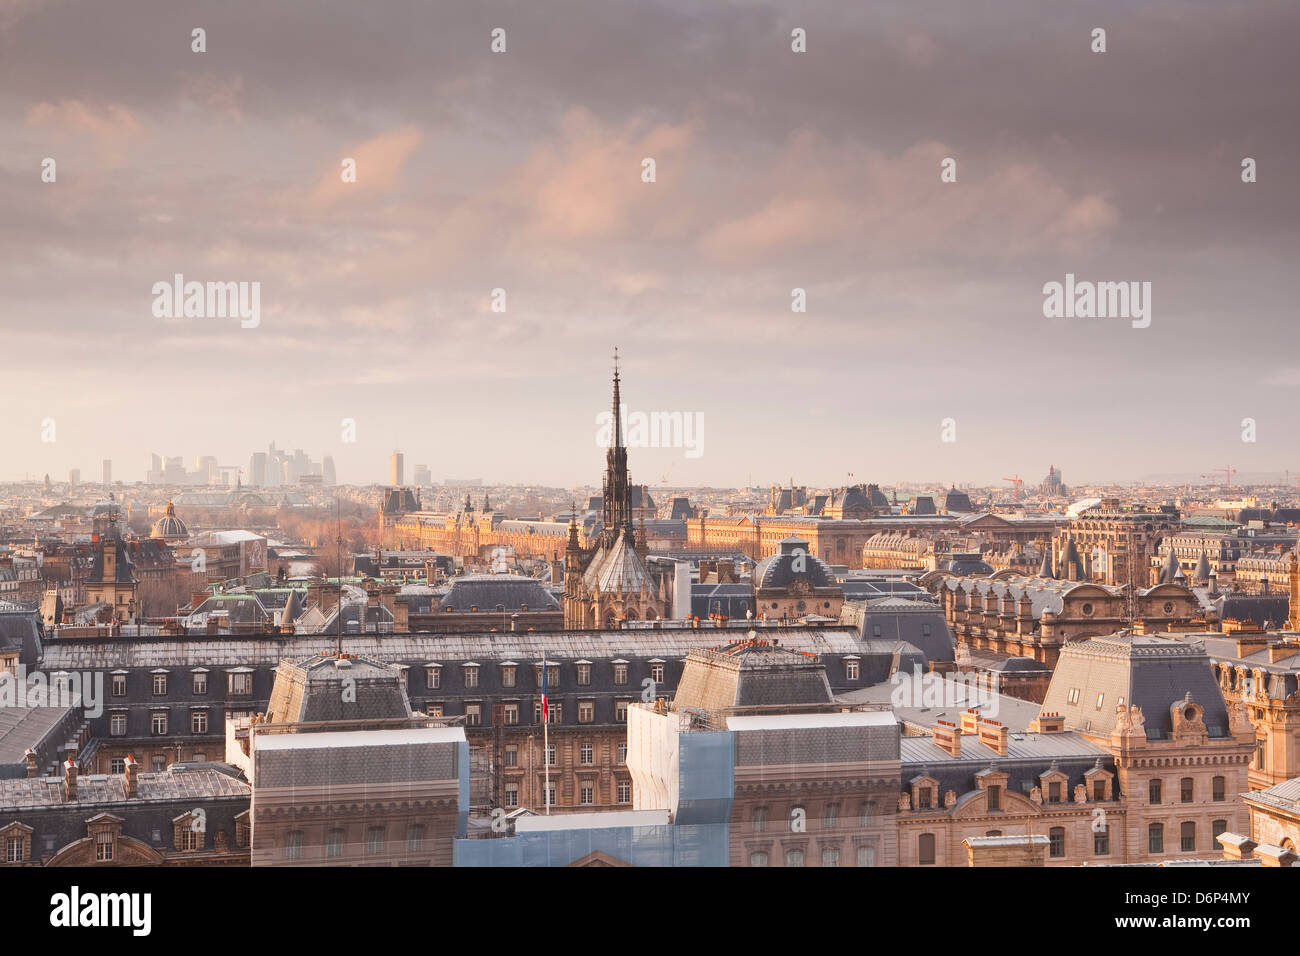 The rooftops of Paris from Notre Dame cathedral with Sainte Chapelle in the middle of the image, Paris, France, Europe Stock Photo